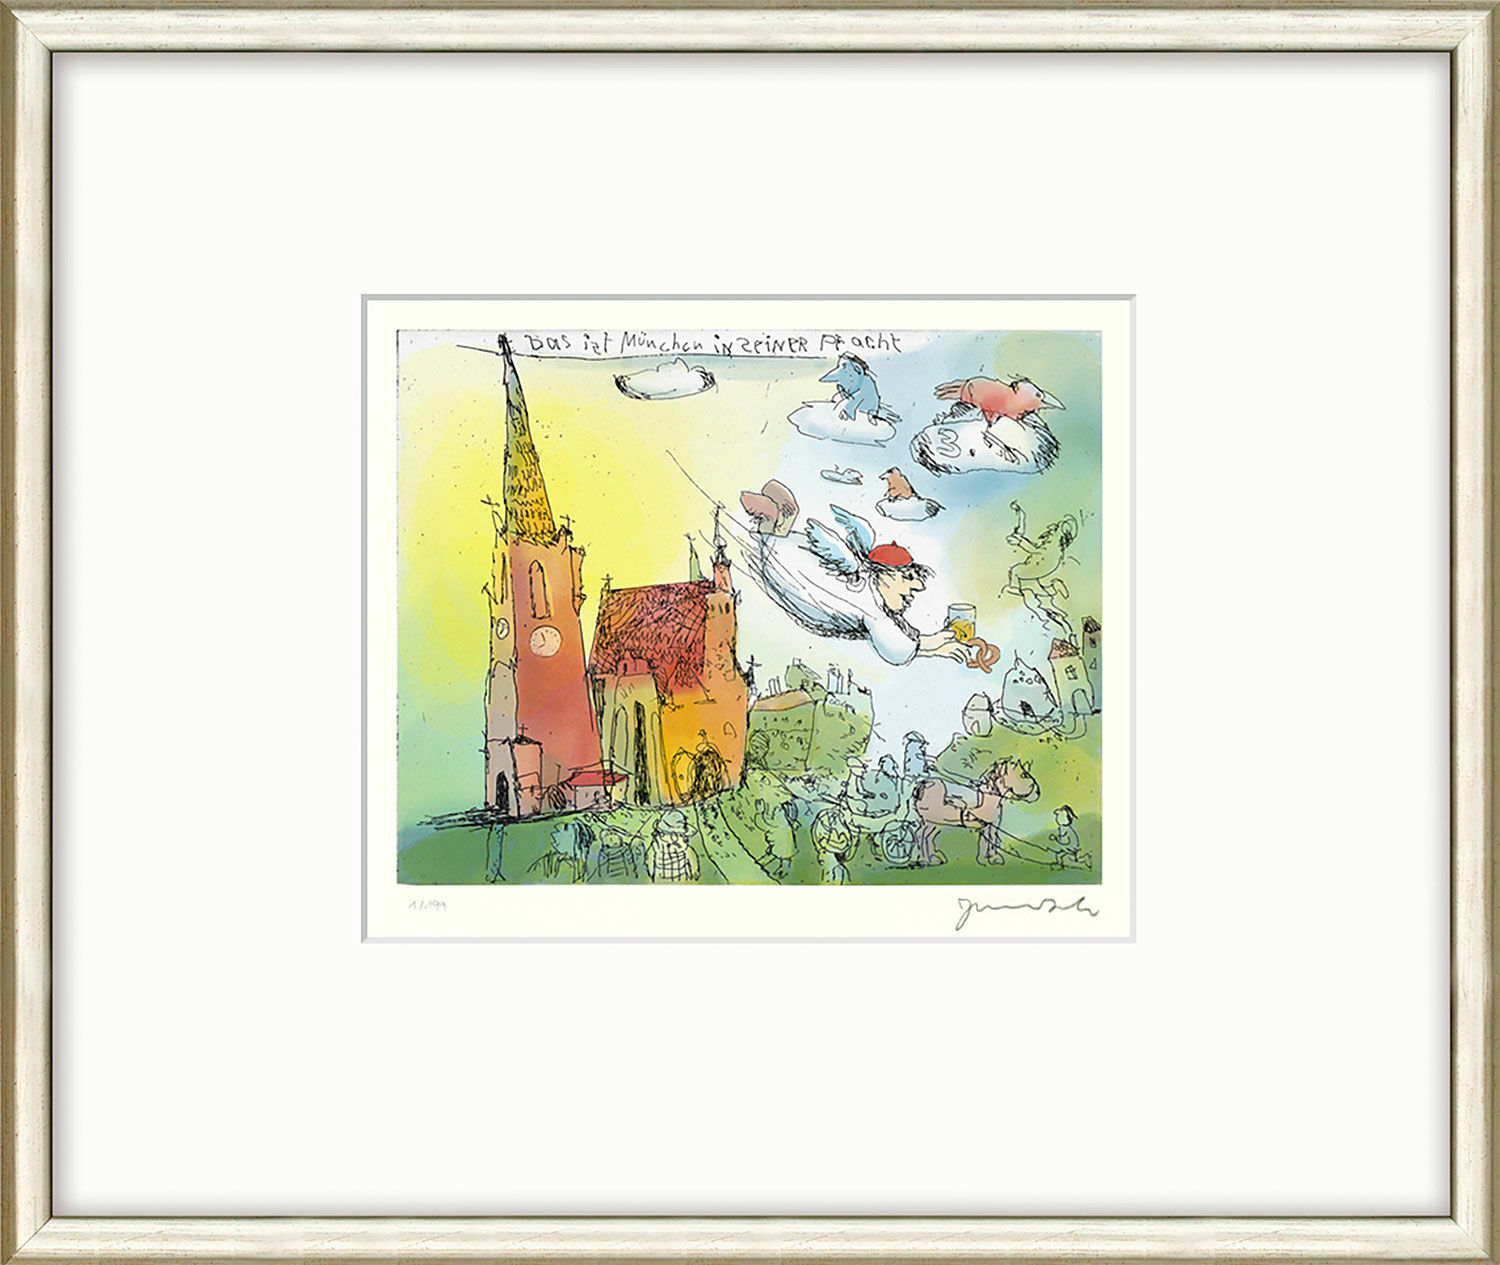 Picture "This is Munich in its Splendour" (2021), framed by Janosch